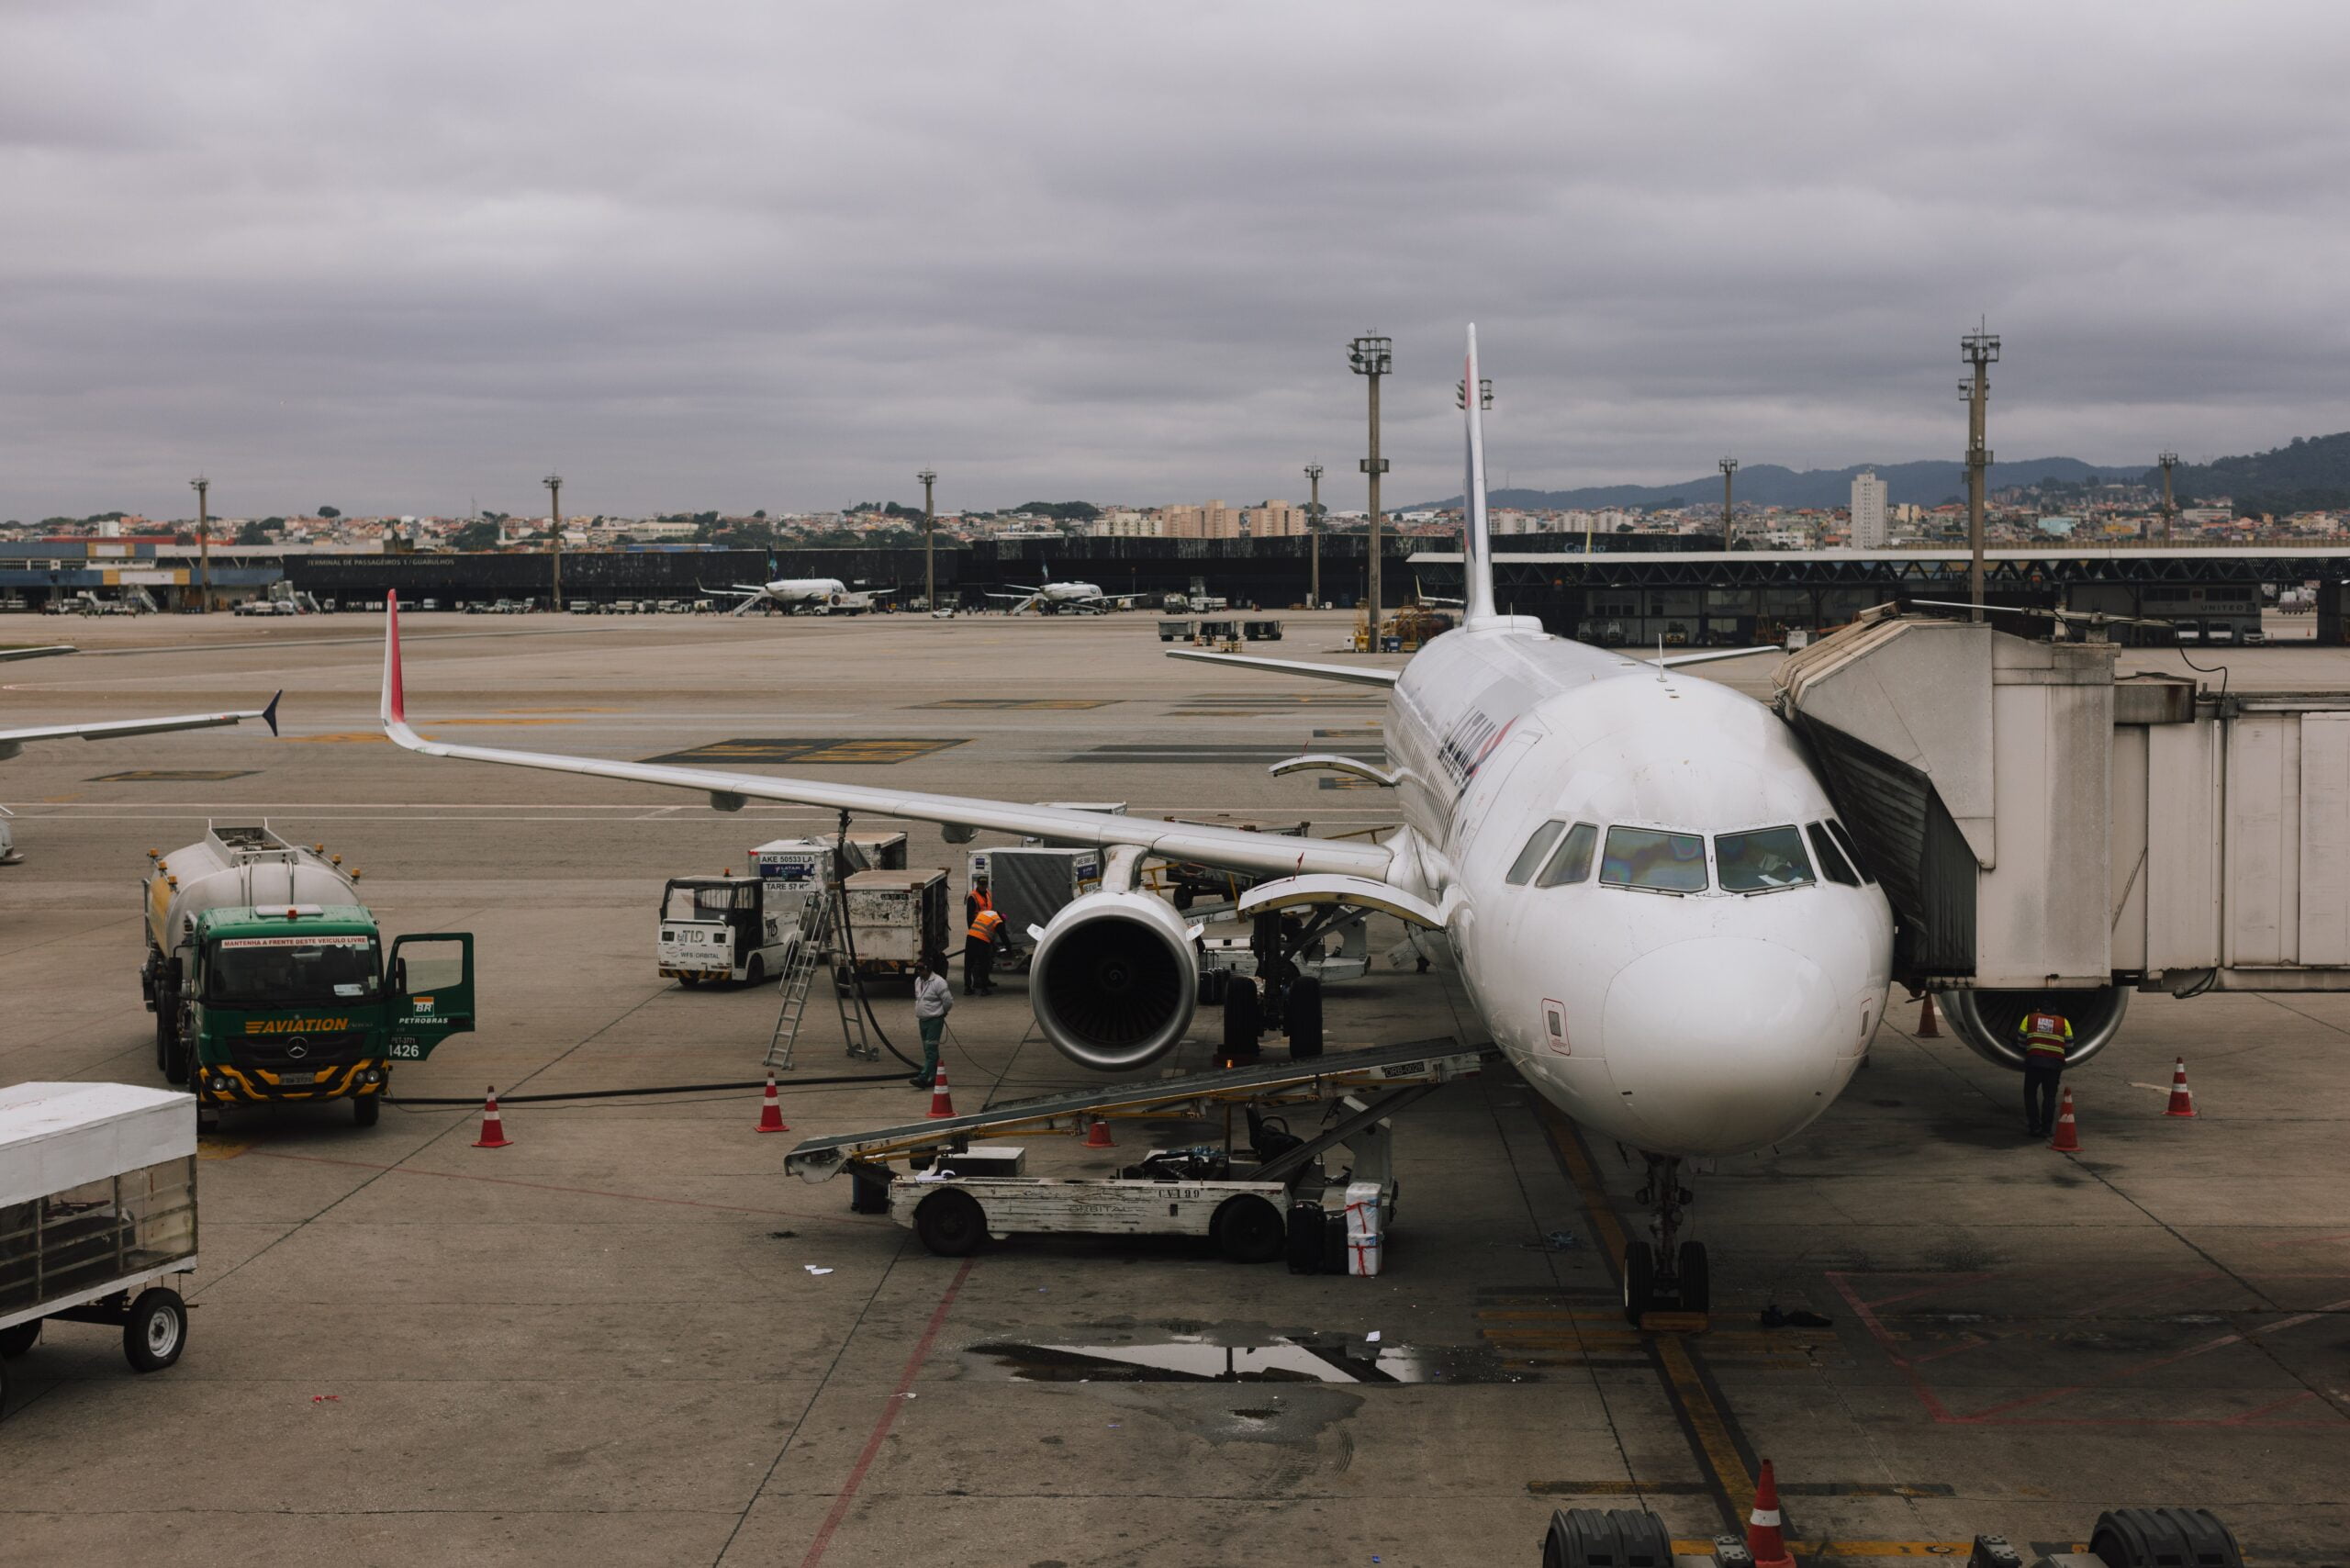 Poop to Power: The Future of Jet Fuel – Is it Sustainable?